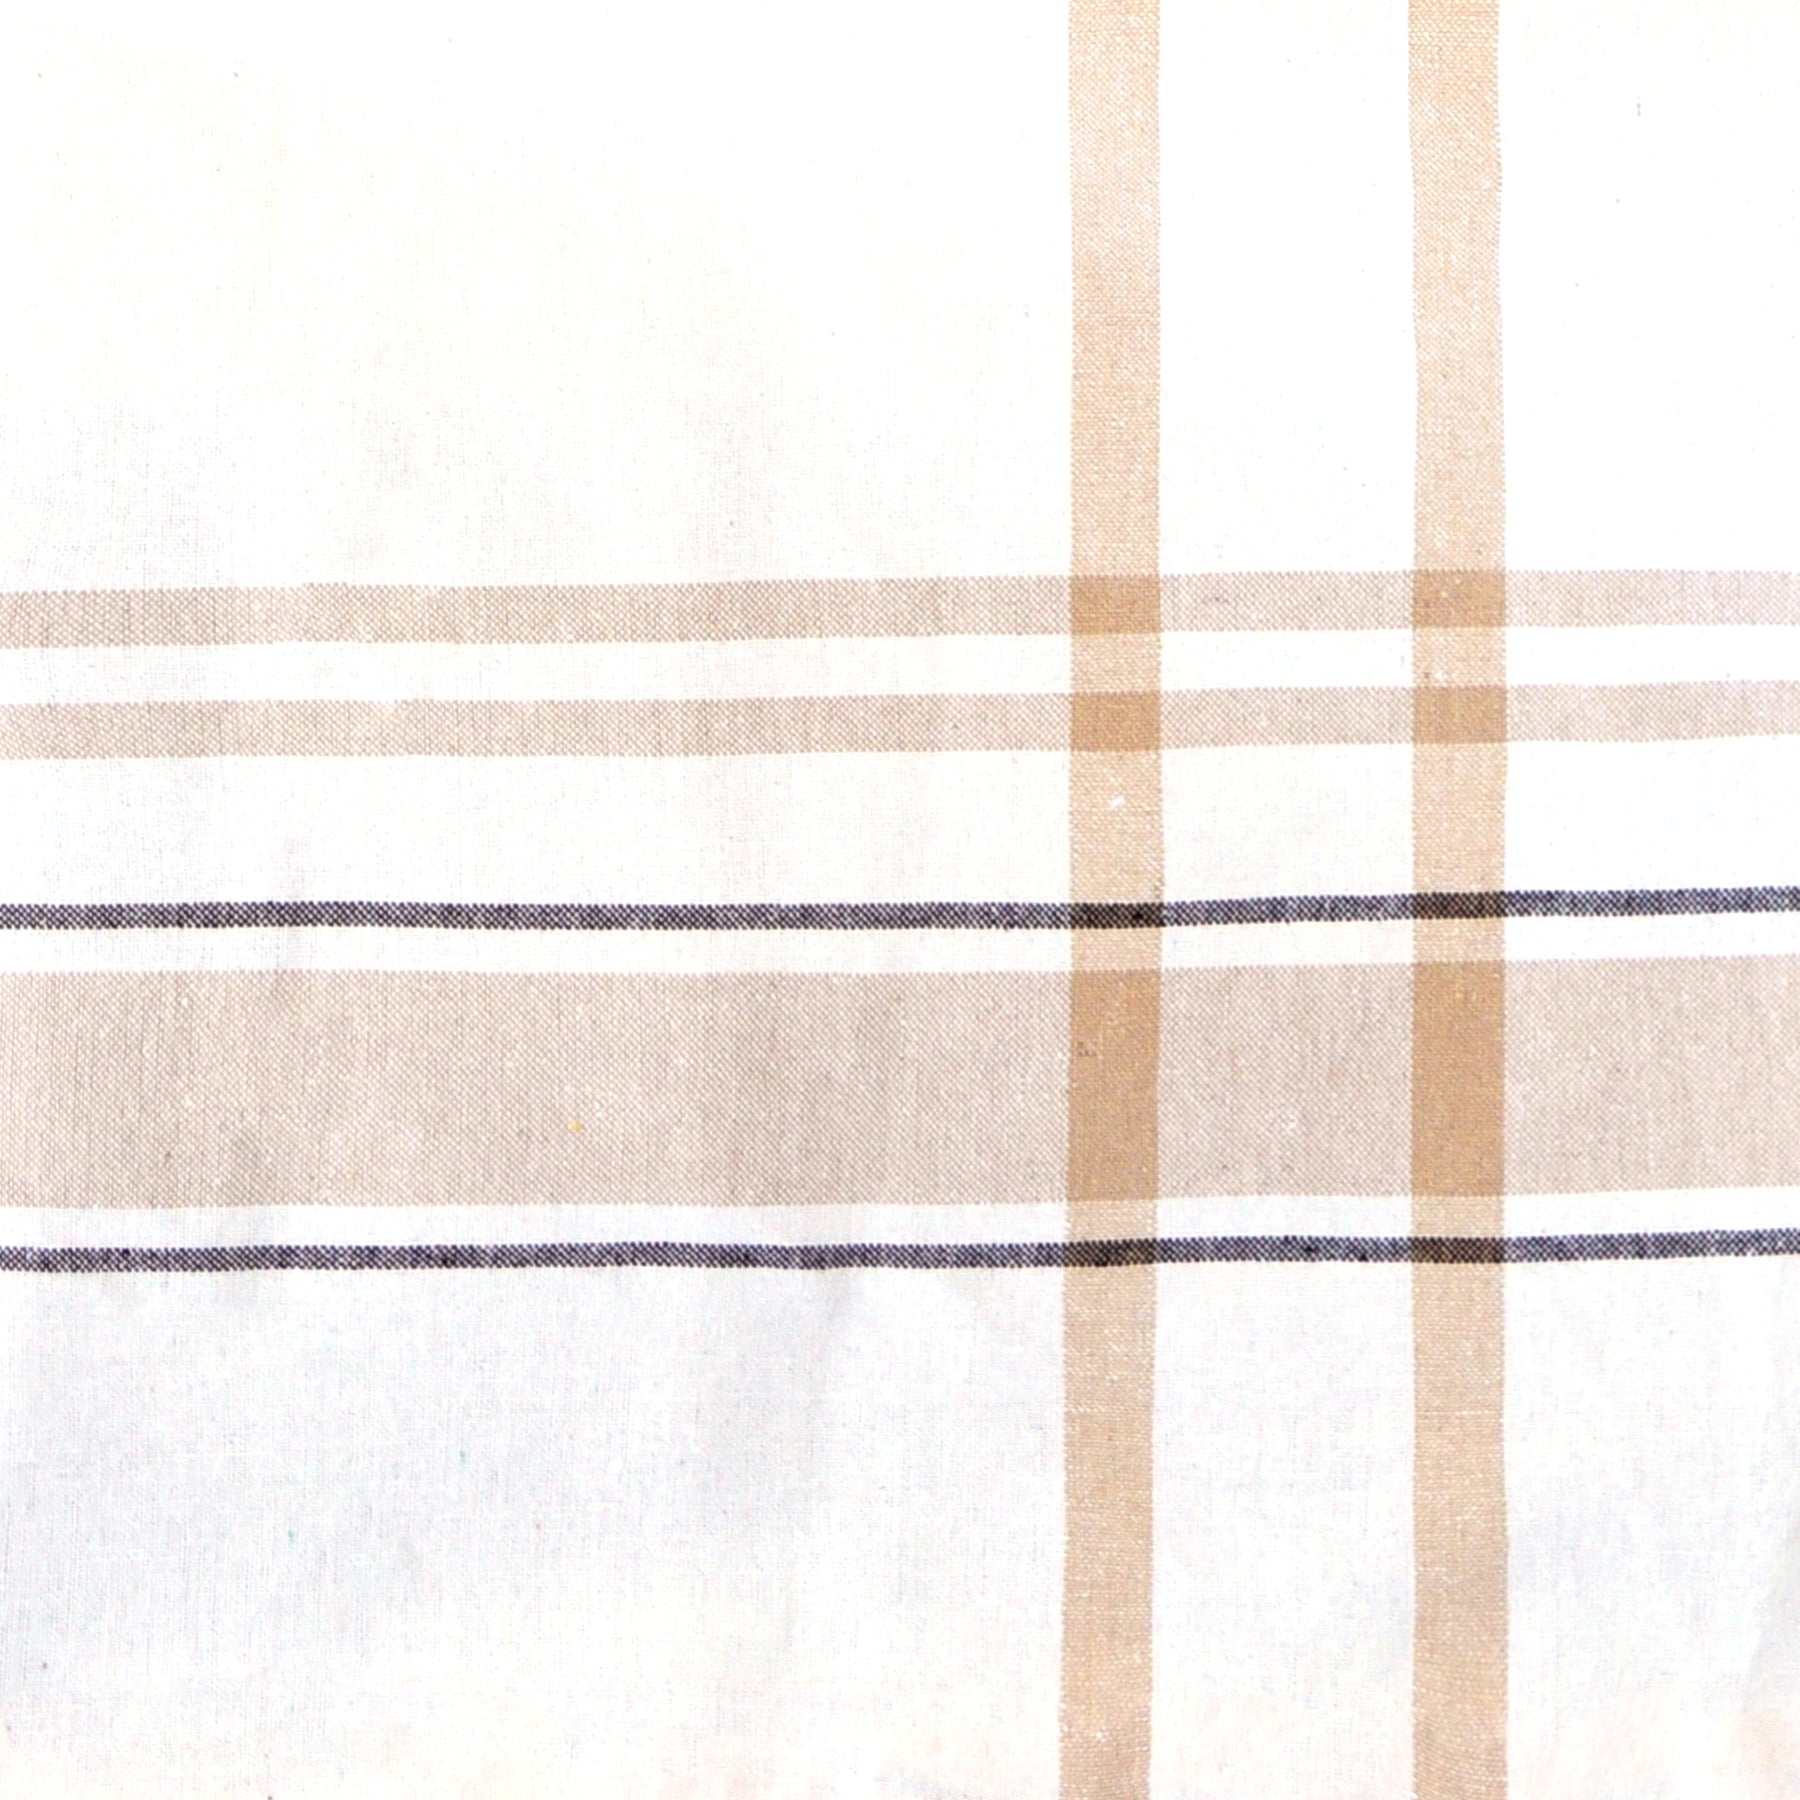 French tablecloth in white and tan plaid with a black and white stripe